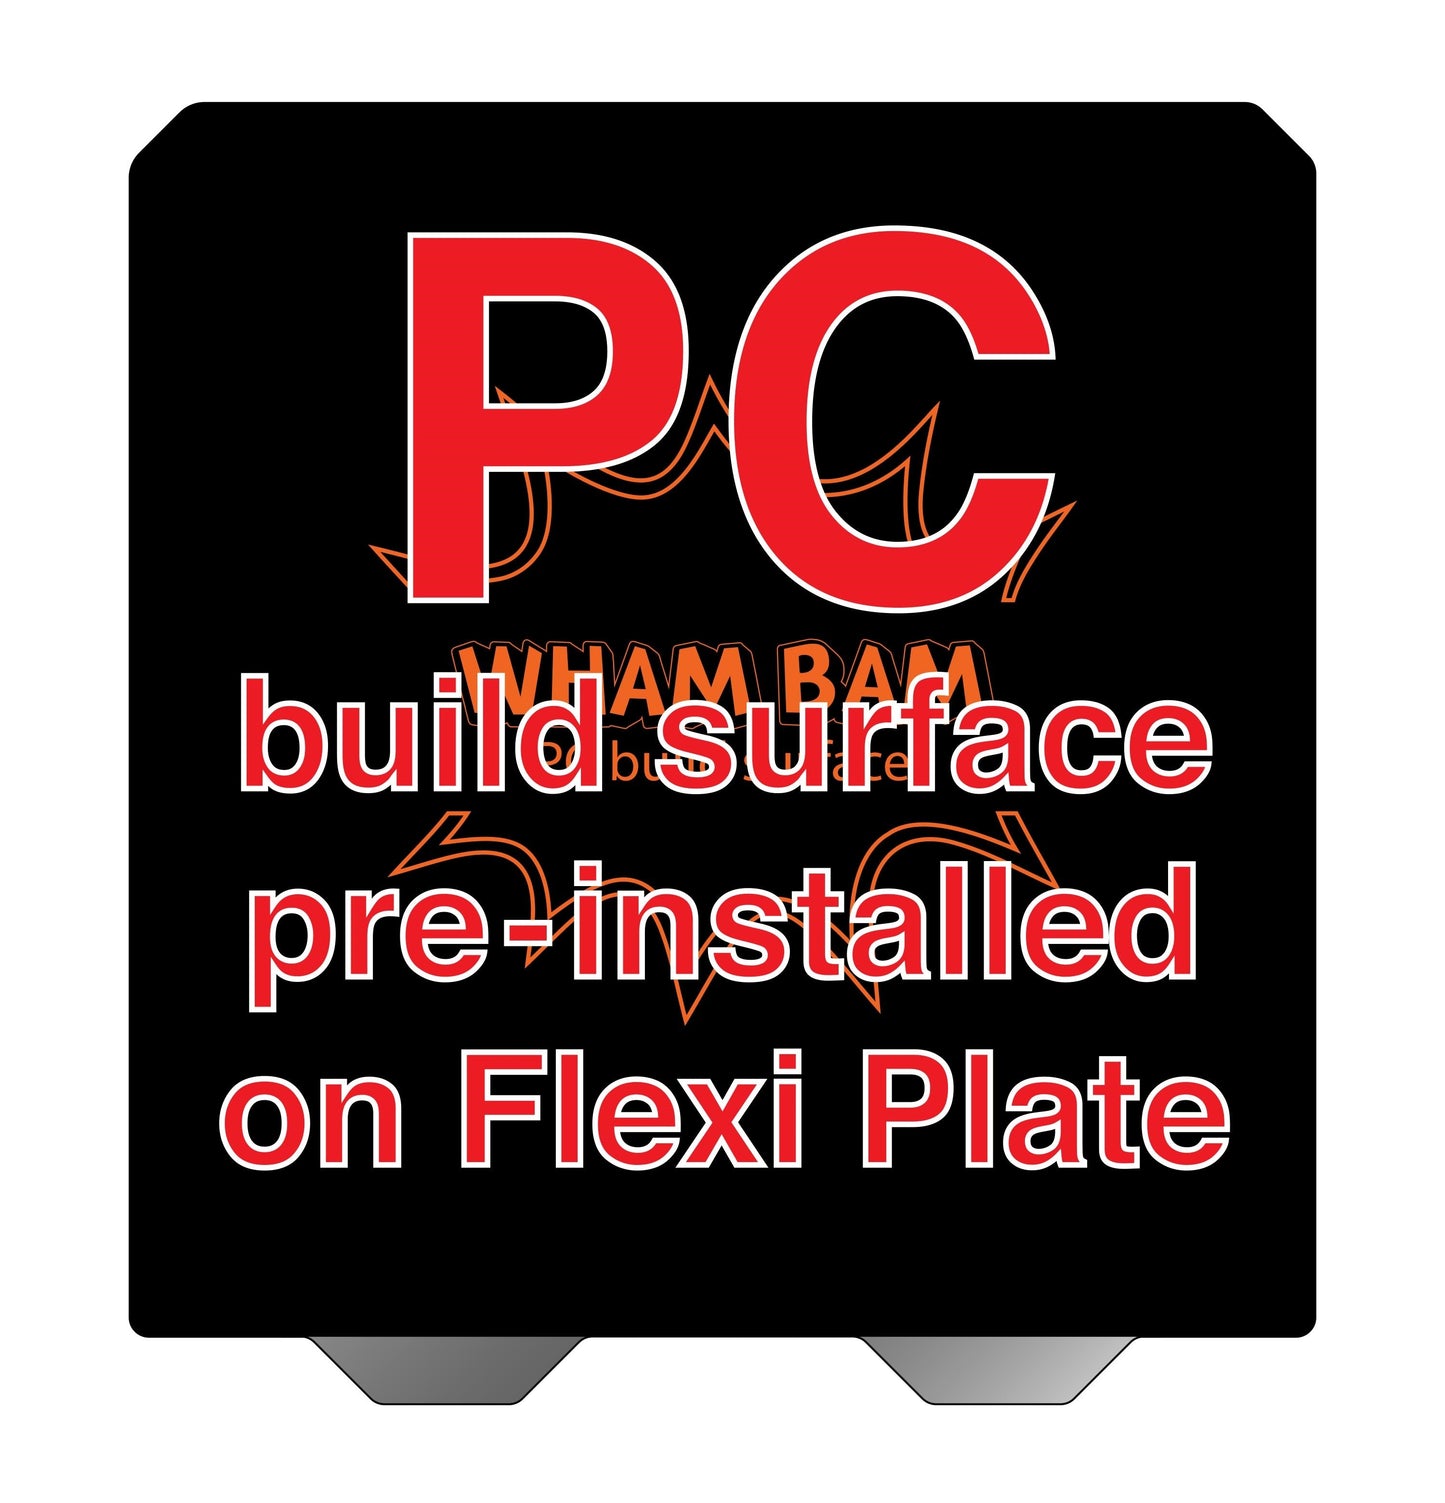 Flexi Plate with Pre-Installed PC Build Surface (Classic Black) - 255 x 245 - Creality CR 6 SE, Robo3D R1+